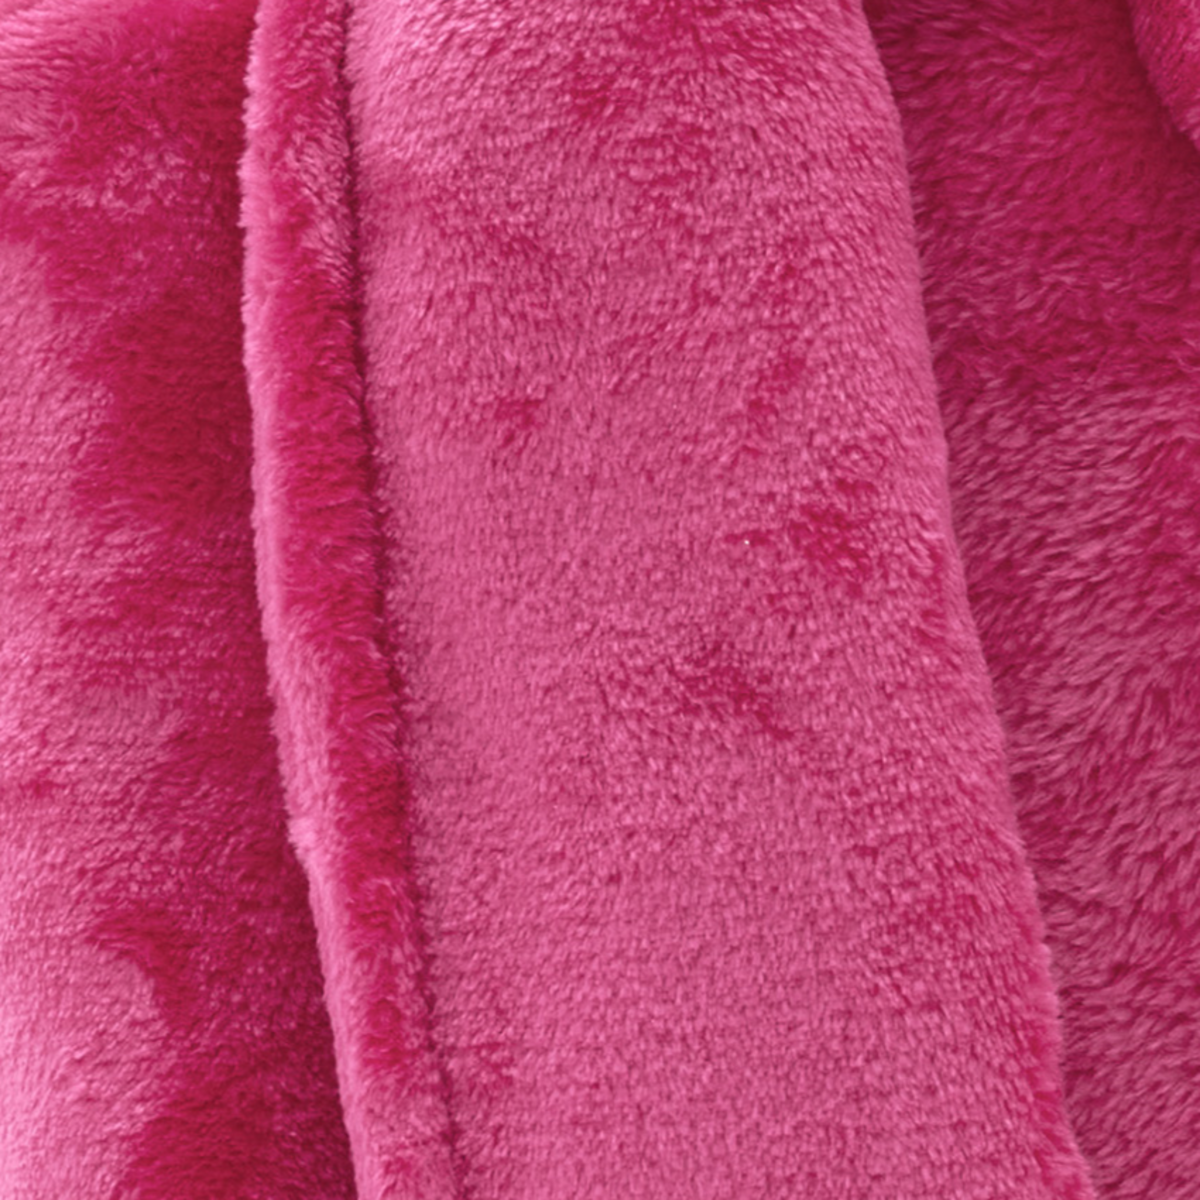 Swatch Sample of Pine Cone Hill Sheepy Fleece 2.0 Robe in Color Cerise